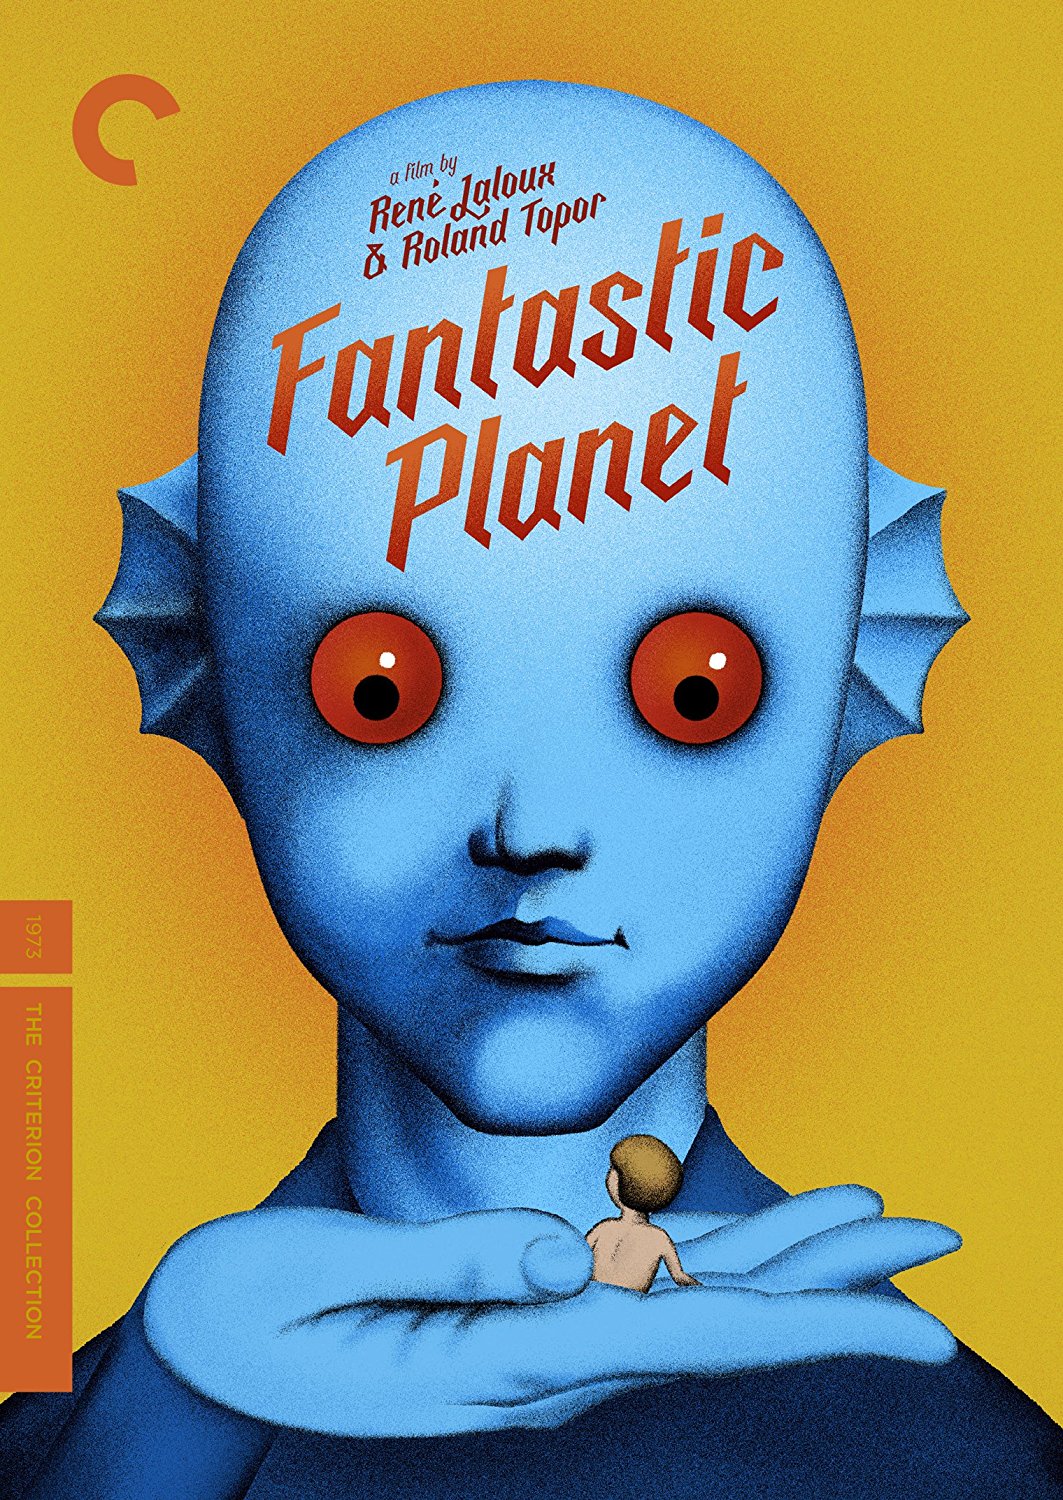 A film by Rene Laloux and Roland Topor - Fantastic Planet